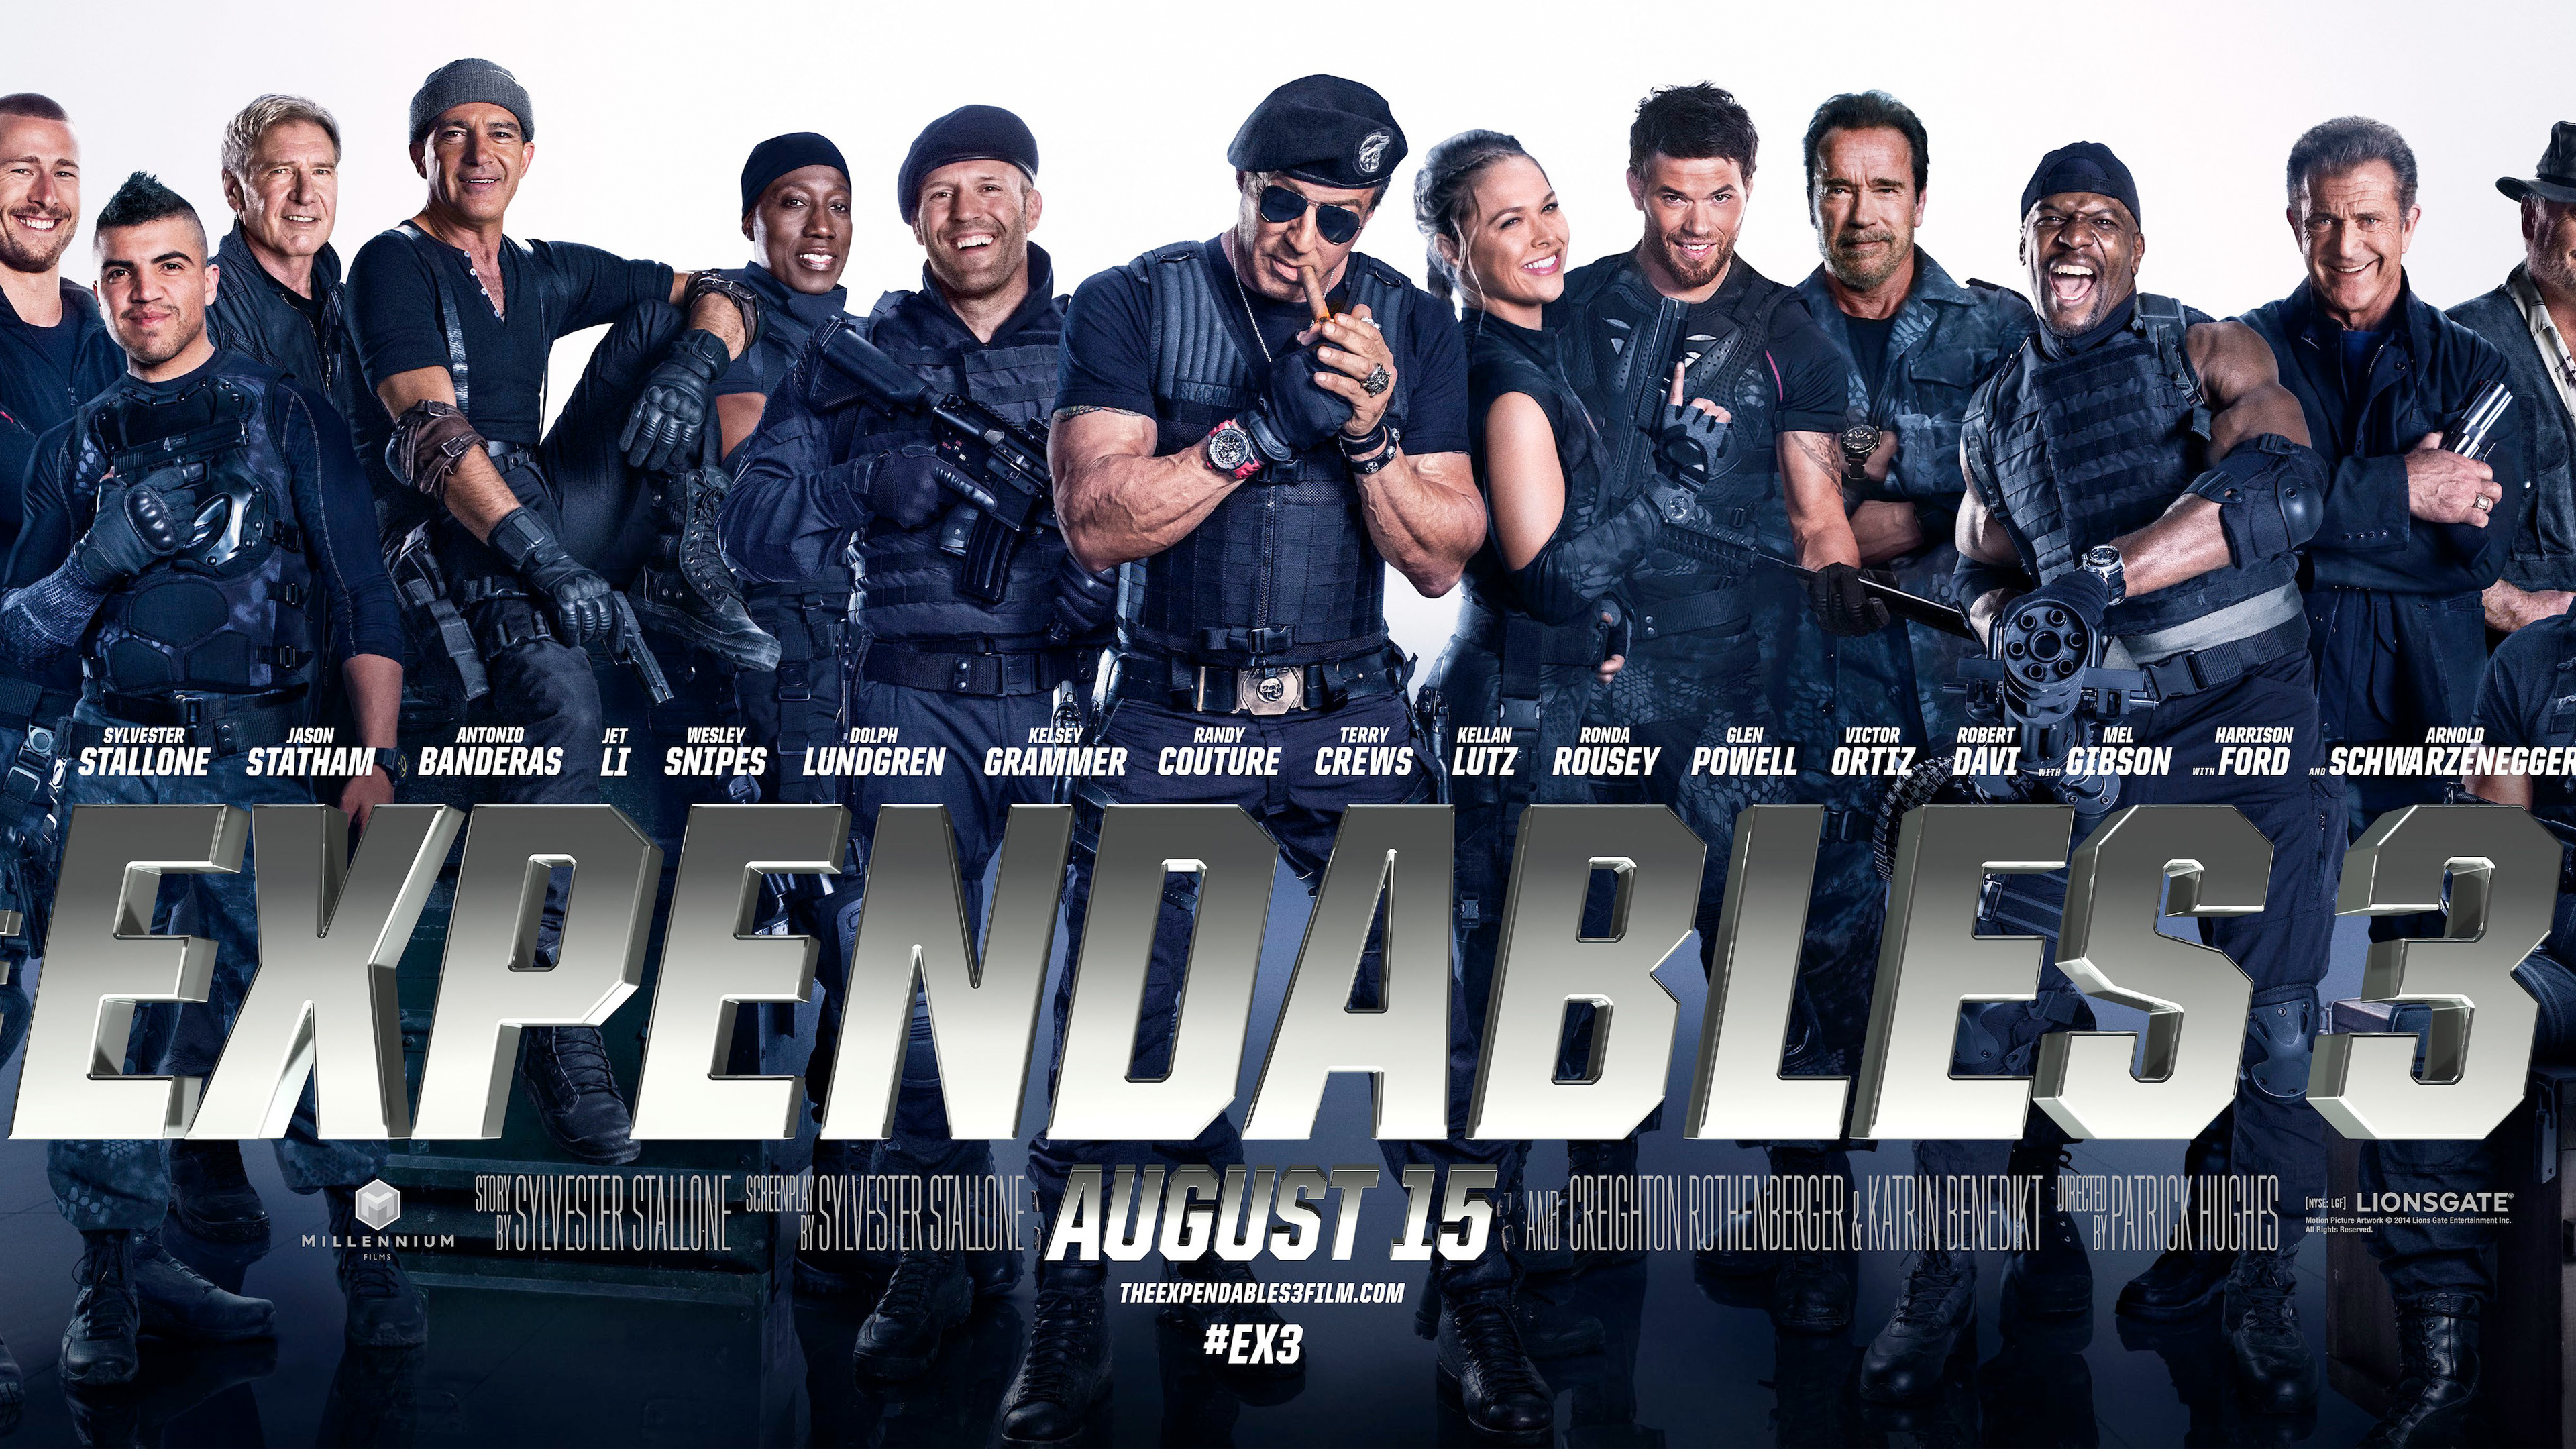 Expendables 3 Wallpapers Hd - HD Wallpaper 